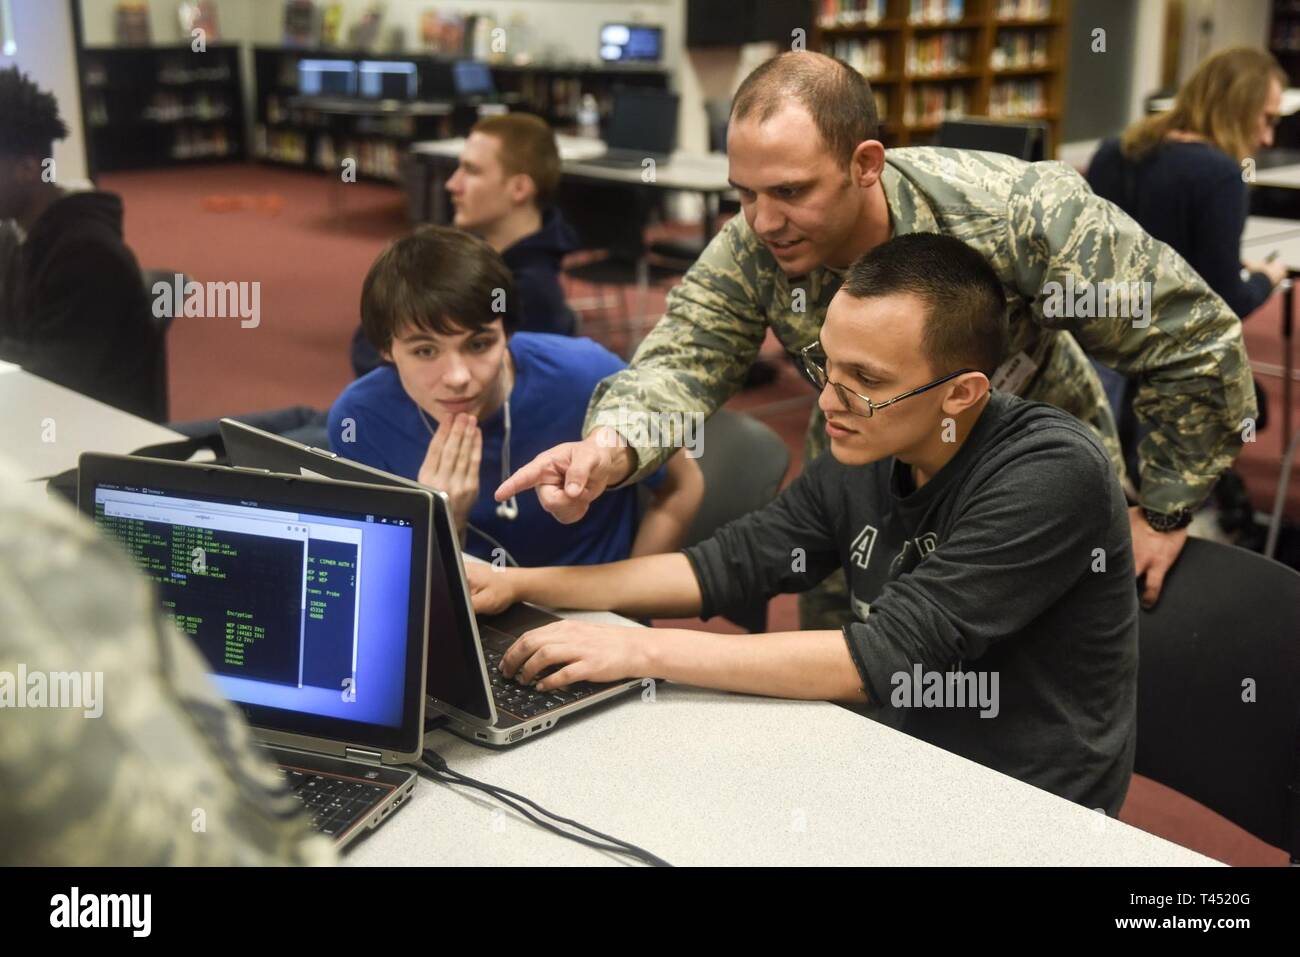 2nd Lt. Thomas Van Dorple, the 189th Operations Group Detachment 1 cyber operations flight commander, discusses a step in the computer science learning course with Stephen O'Rand and Chris Wright, Feb. 26, 2019, during a computer science class at Jacksonville Hight School, Jacksonville, Ark. The course was hosted by Mr. Sam Grubb, a cyber security education specialist and teacher at the high school who built the course to teach basic computer science skills with a foundation on security concepts. Stock Photo